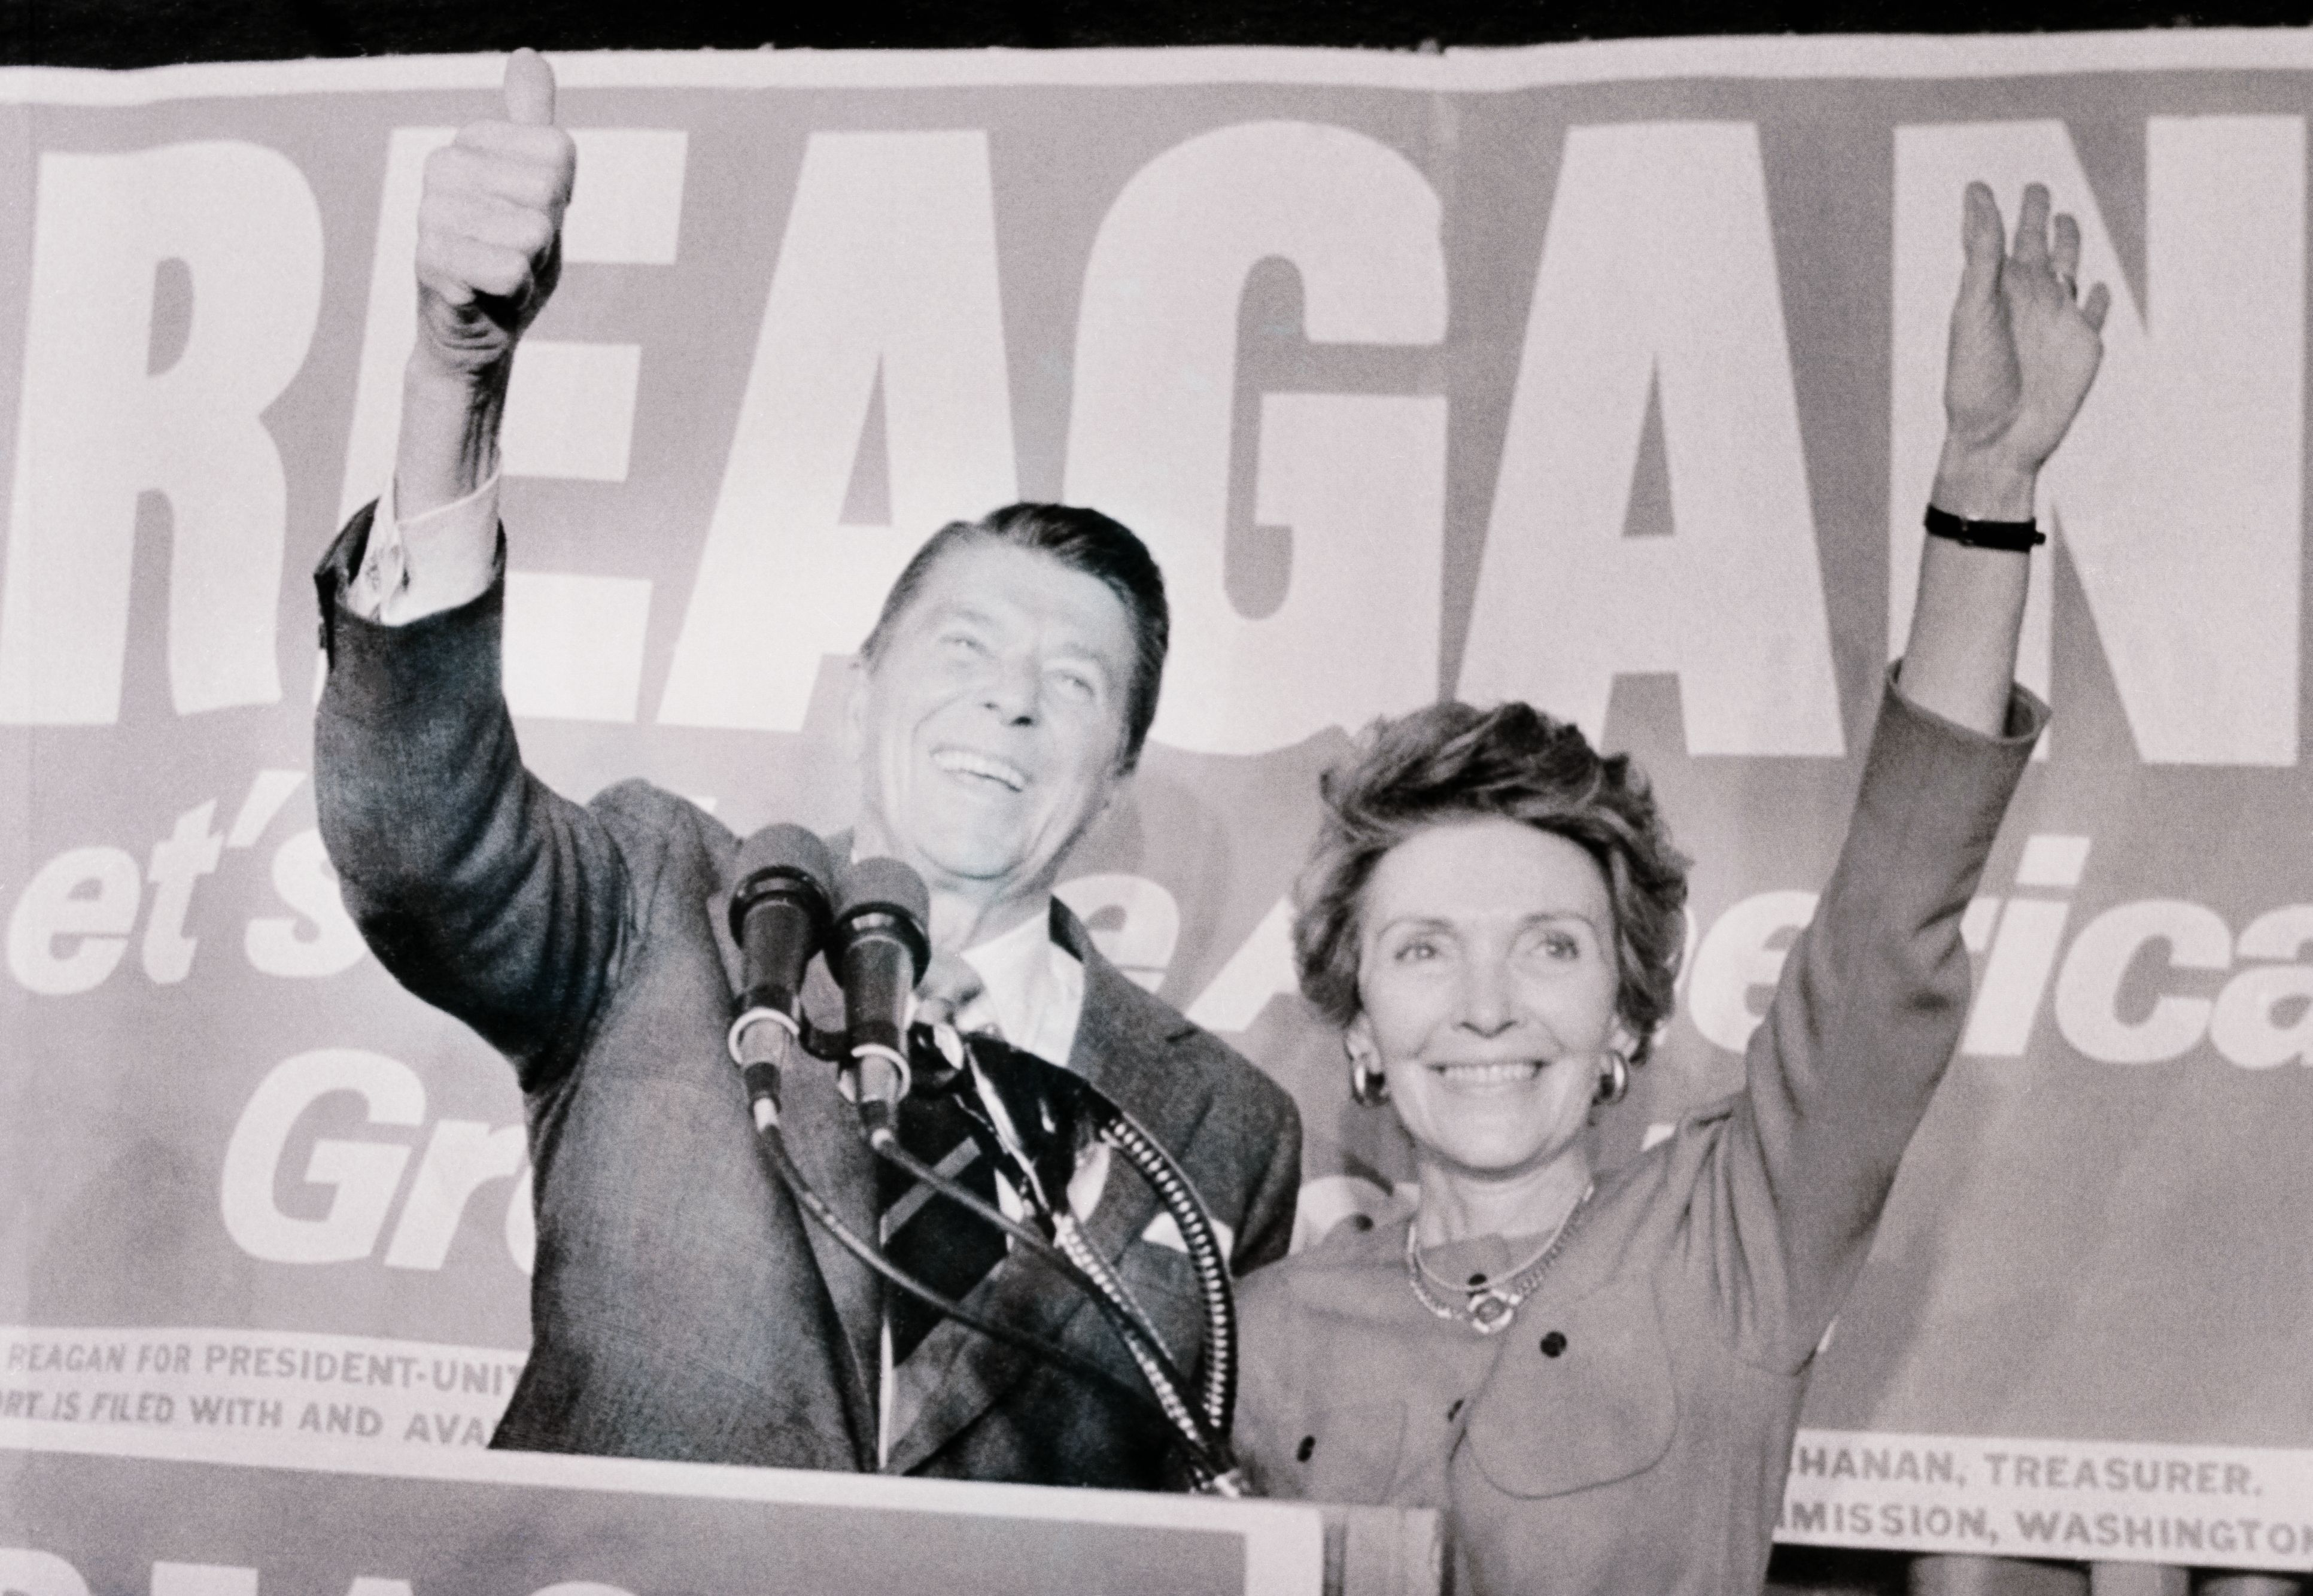 A black and white image of Ronald and Nancy Reagan